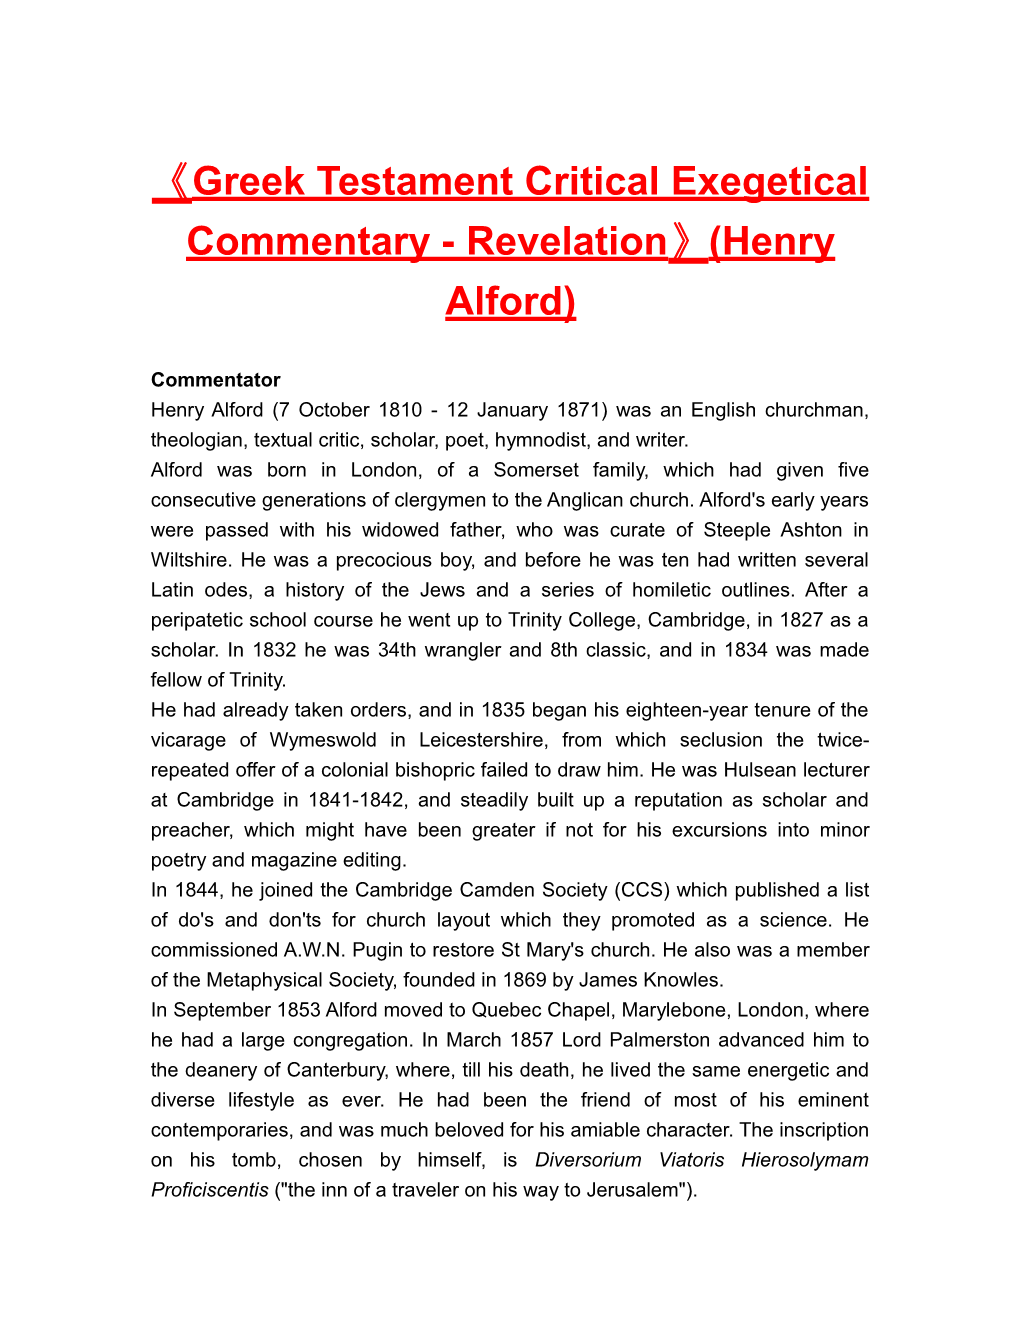 Greek Testament Critical Exegetical Commentary - Revelation (Henry Alford)